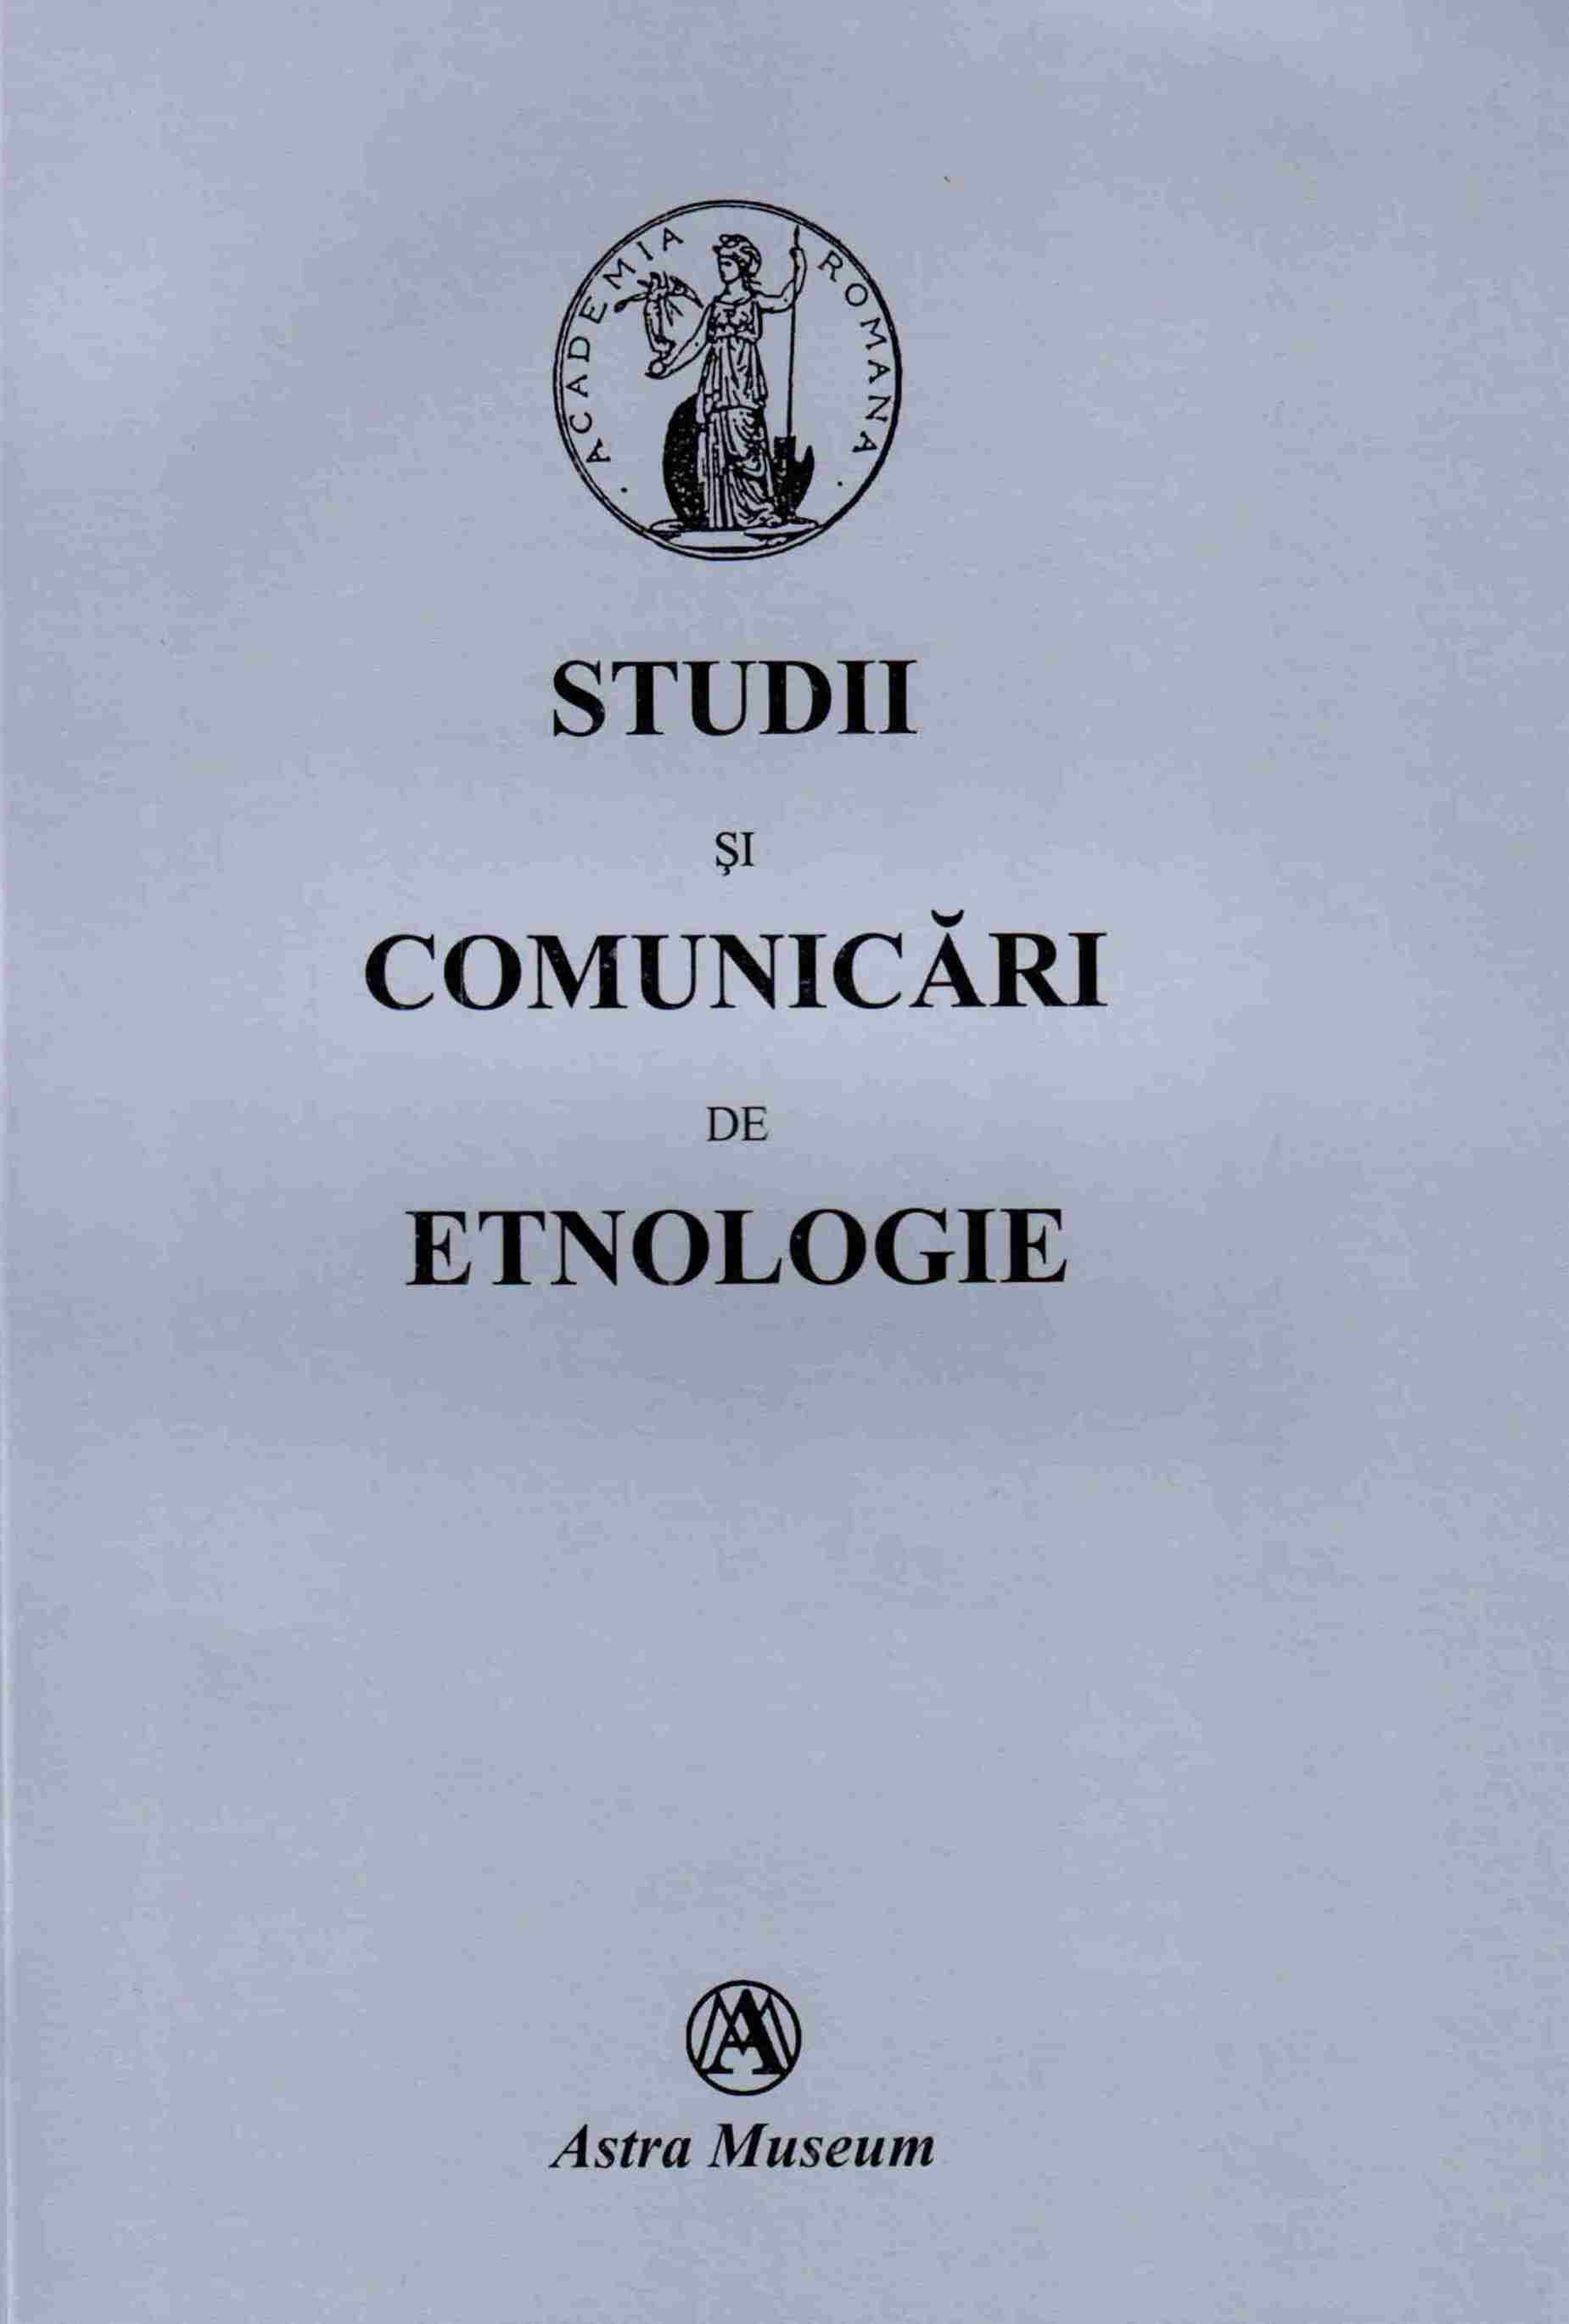 STUDIES AND COMMUNICATIONS OF ETHNOLOGY